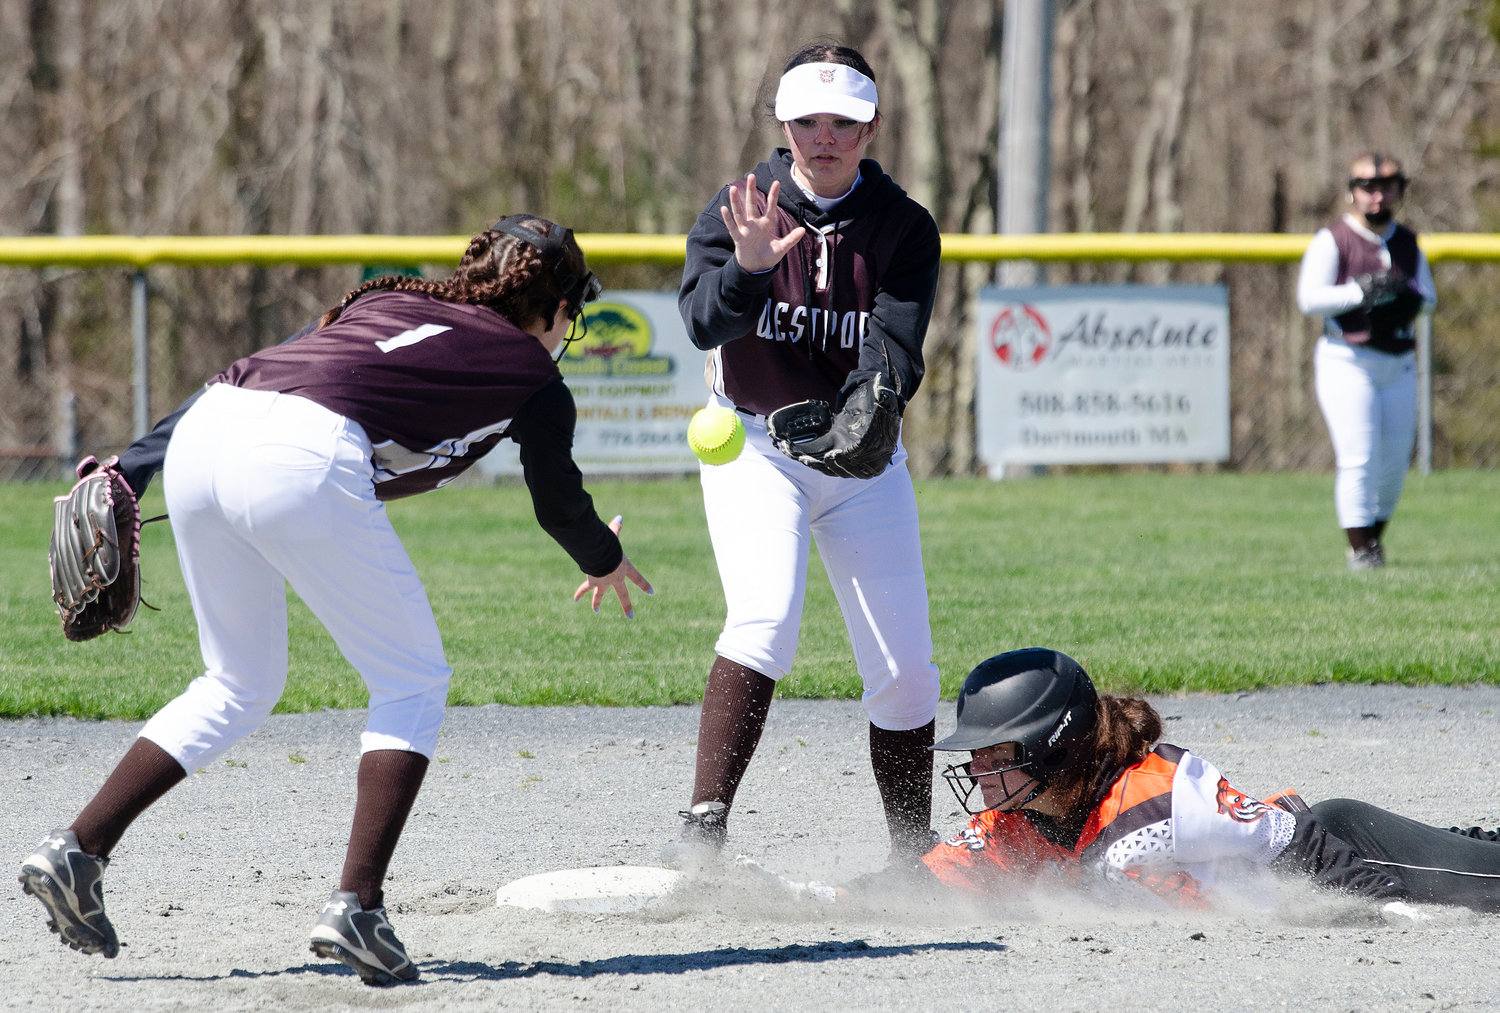 Shortstop Julia George (left) dishes the ball to second baseman Isabel Berube (middle) as a Diman player slides safely into second base.